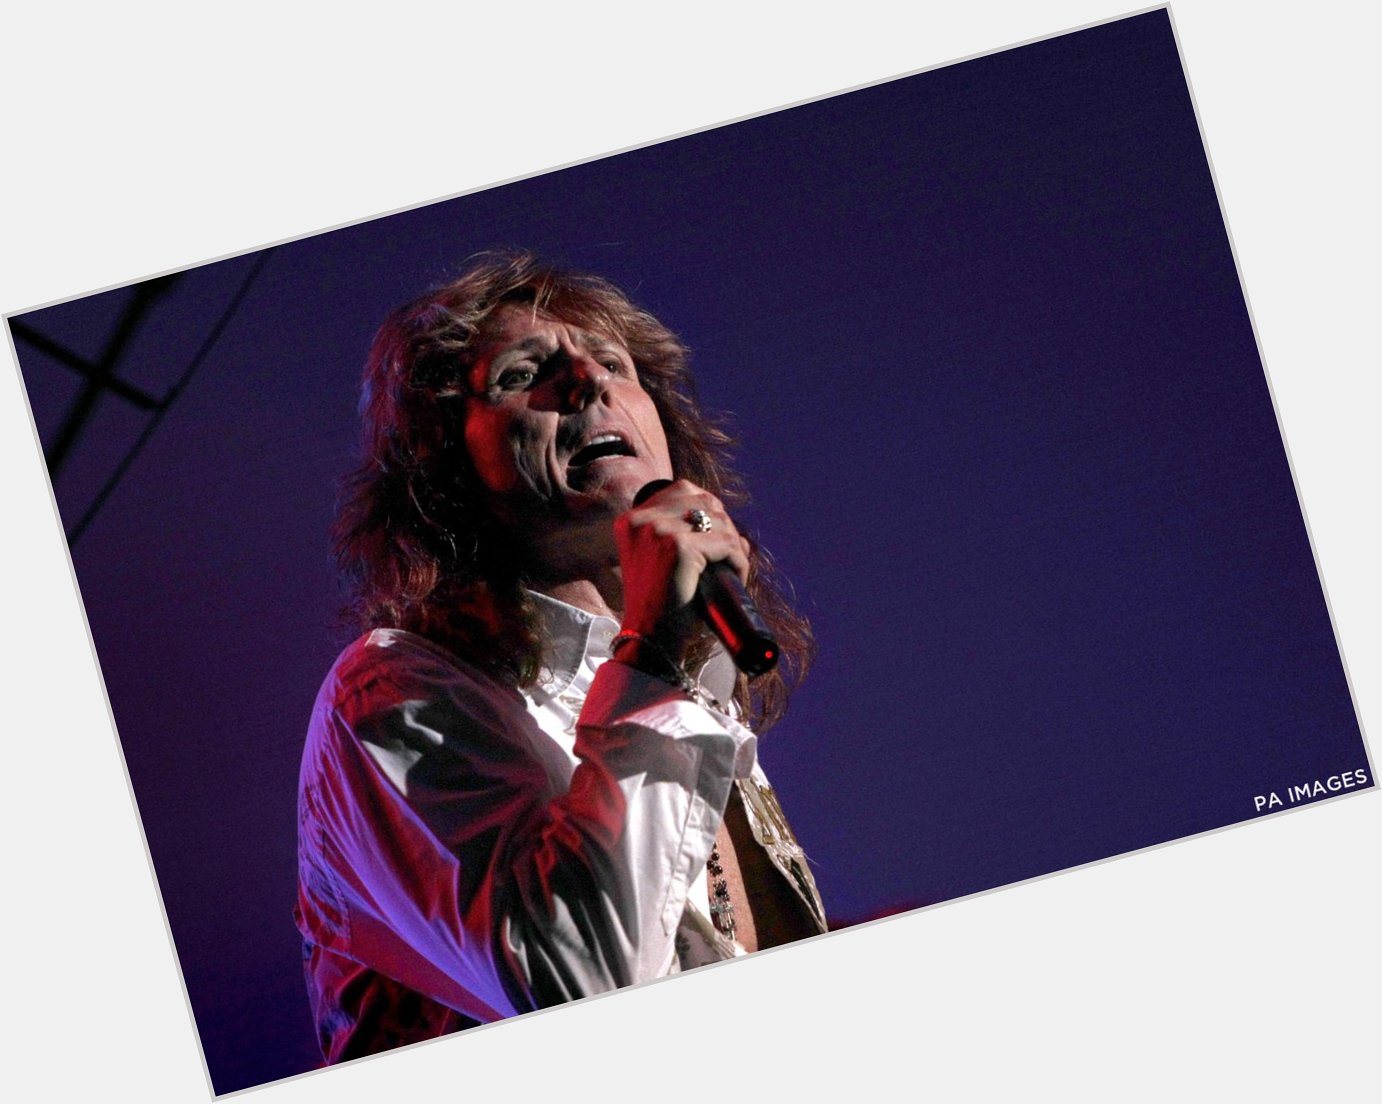 A huge happy 64th birthday to David Coverdale. May your street of dreams be long and not lonely! 